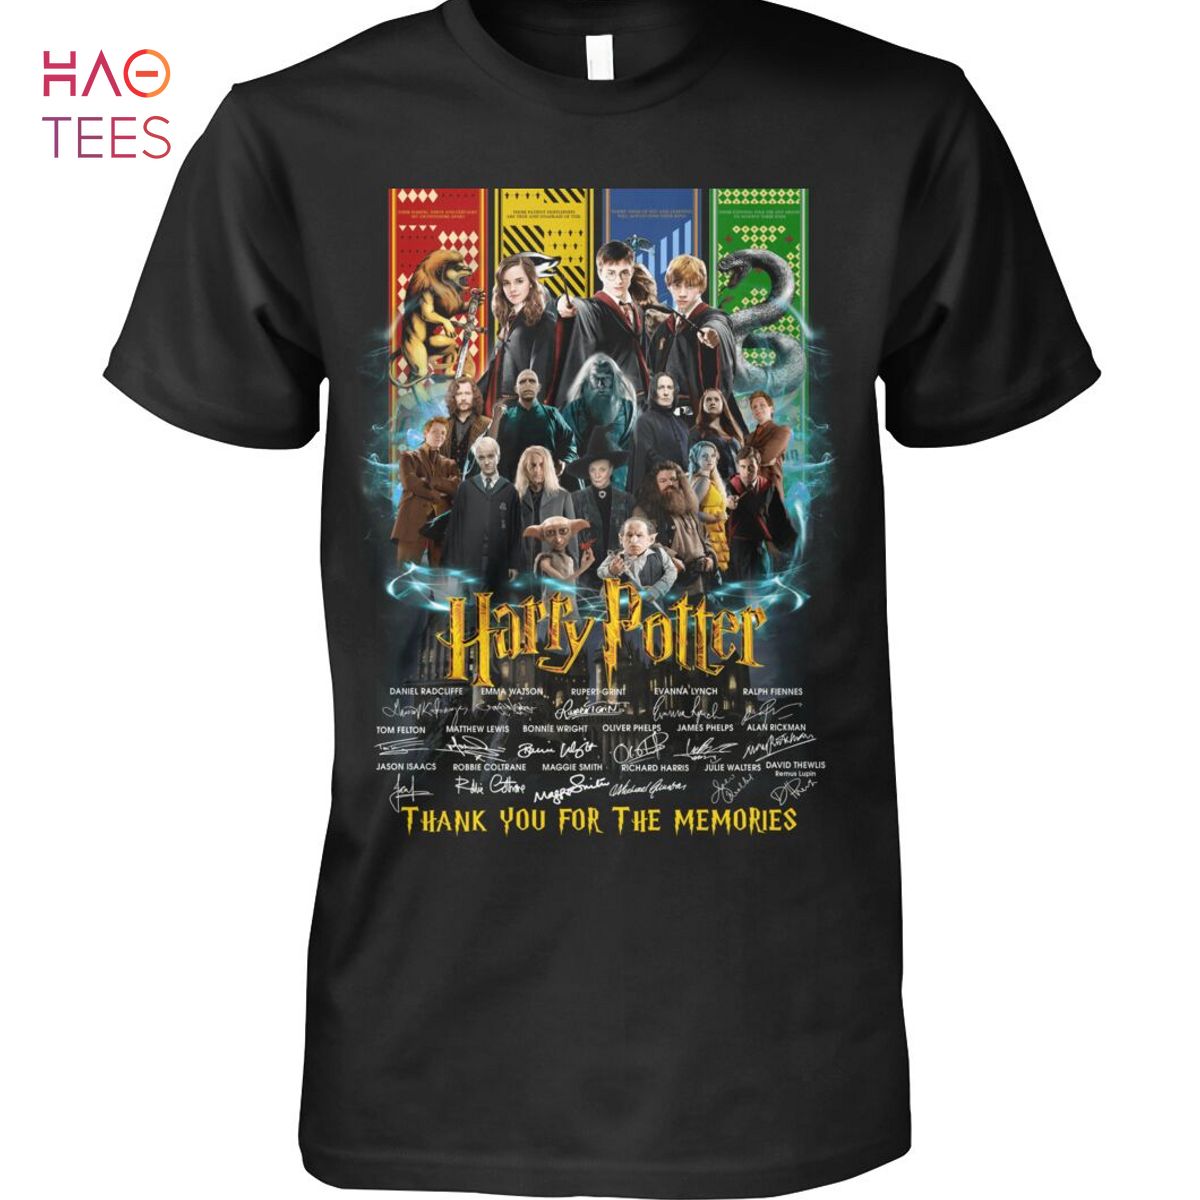 Harry Potter Thank You For The Memories Shirt